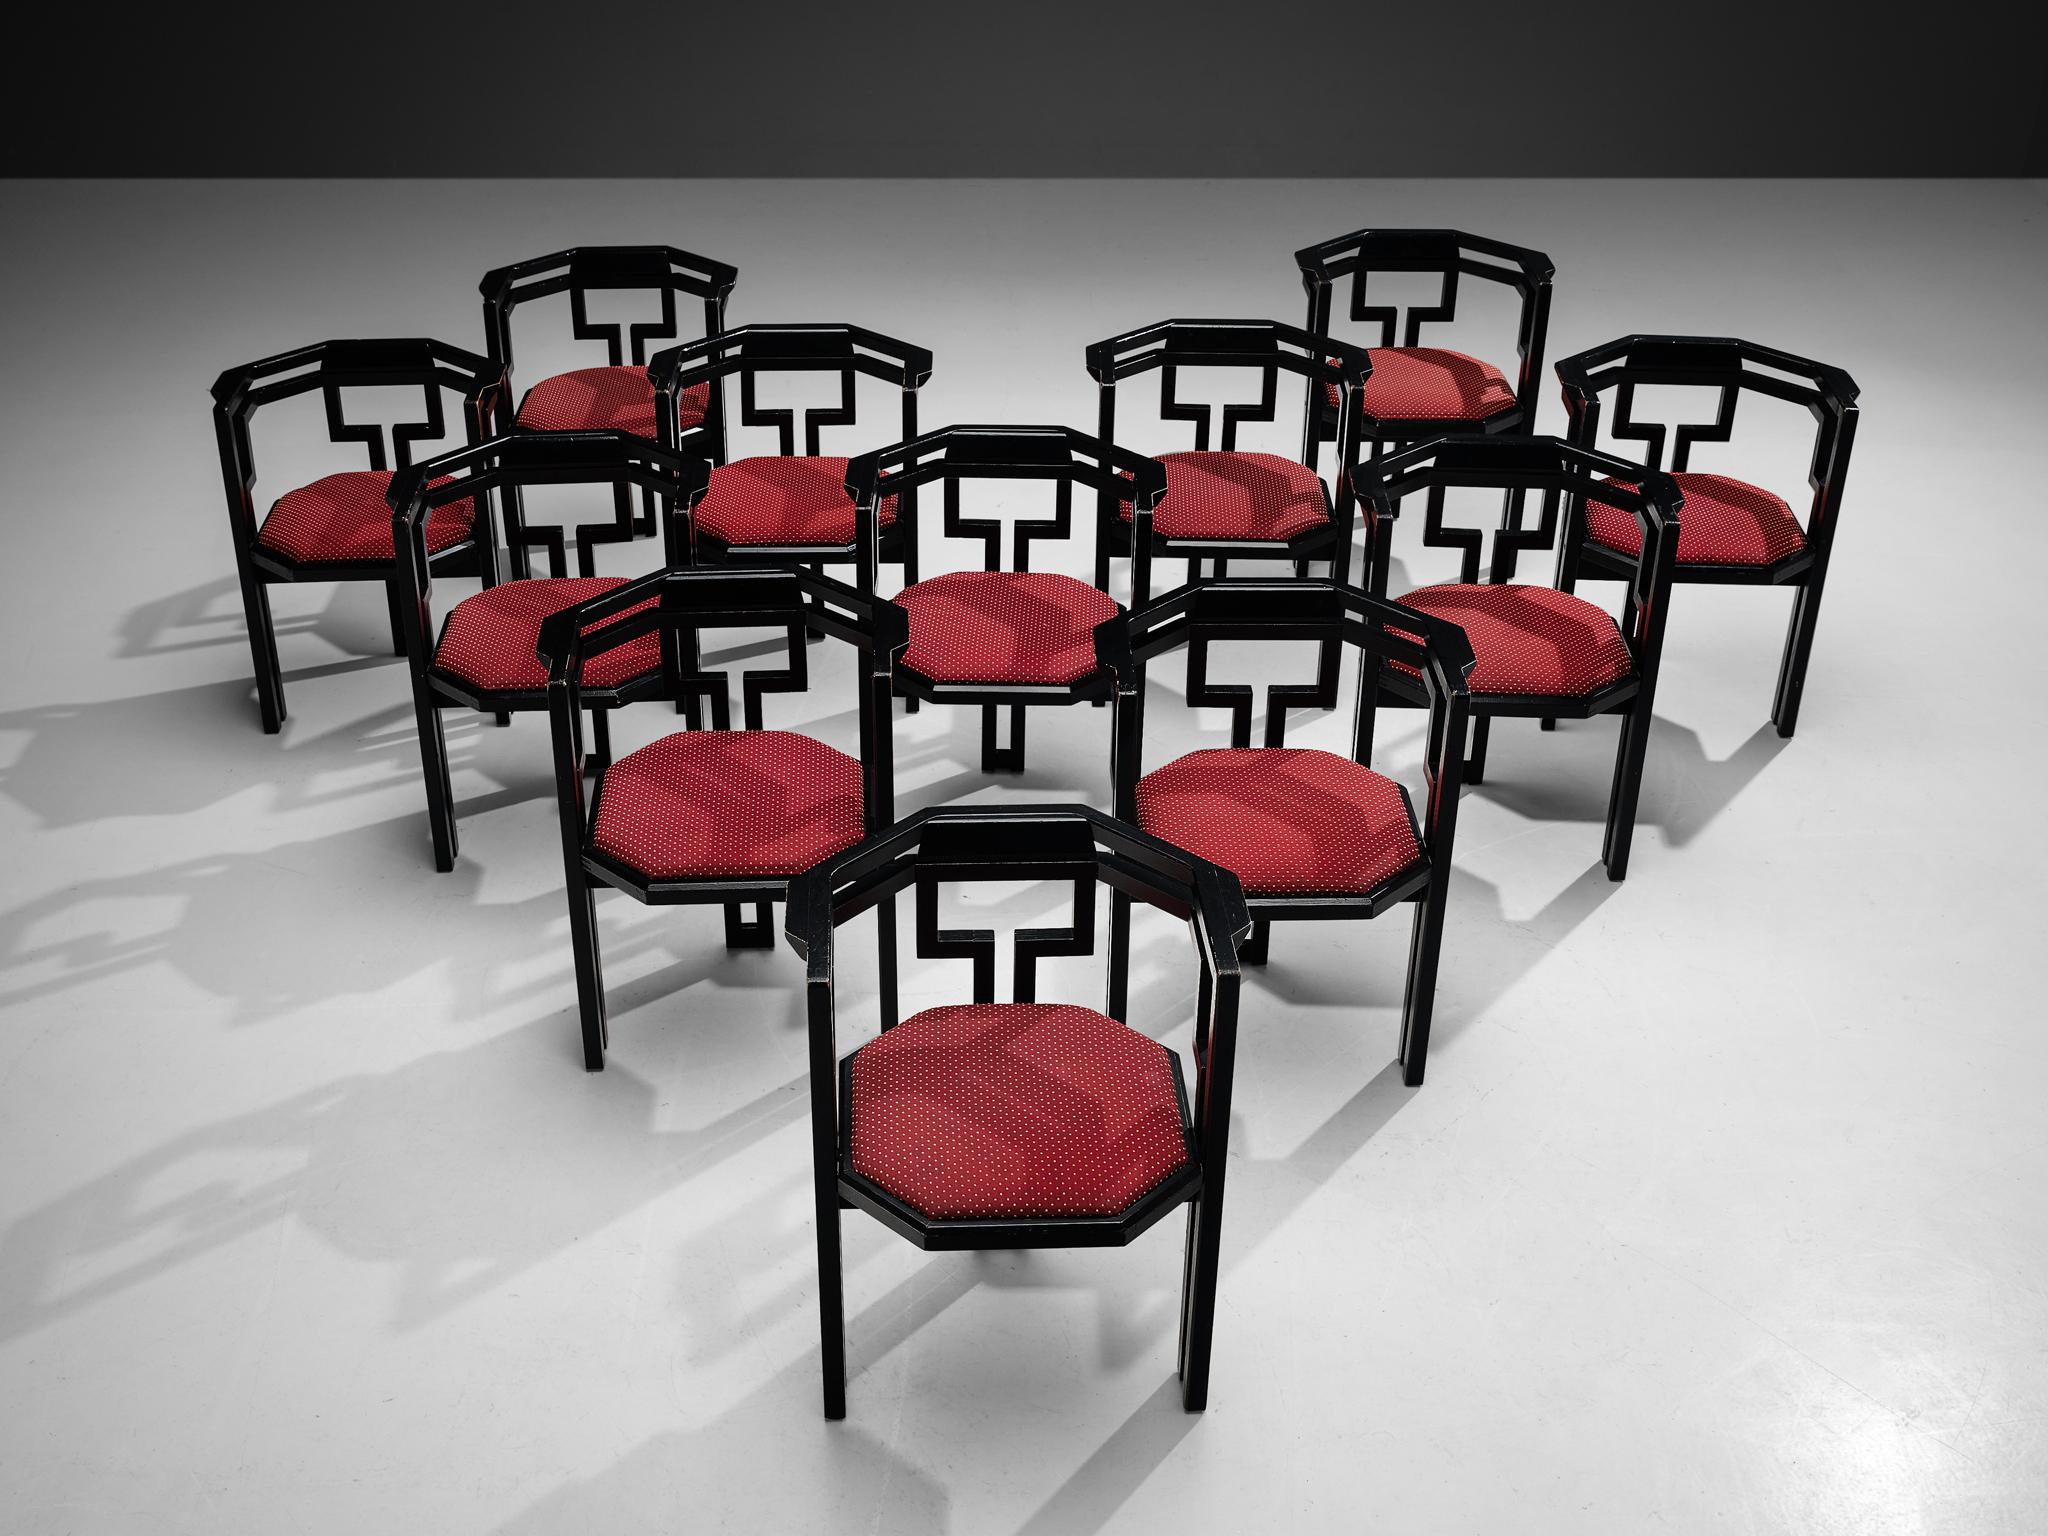 Set of twelve dining chairs, black lacquered oak, fabric, Italy, 1970s.

Outstanding set of twelve geometric Italian dining chairs. These chairs combine a sculptural design that is simple, but very strong in lines and proportions with a luxurious